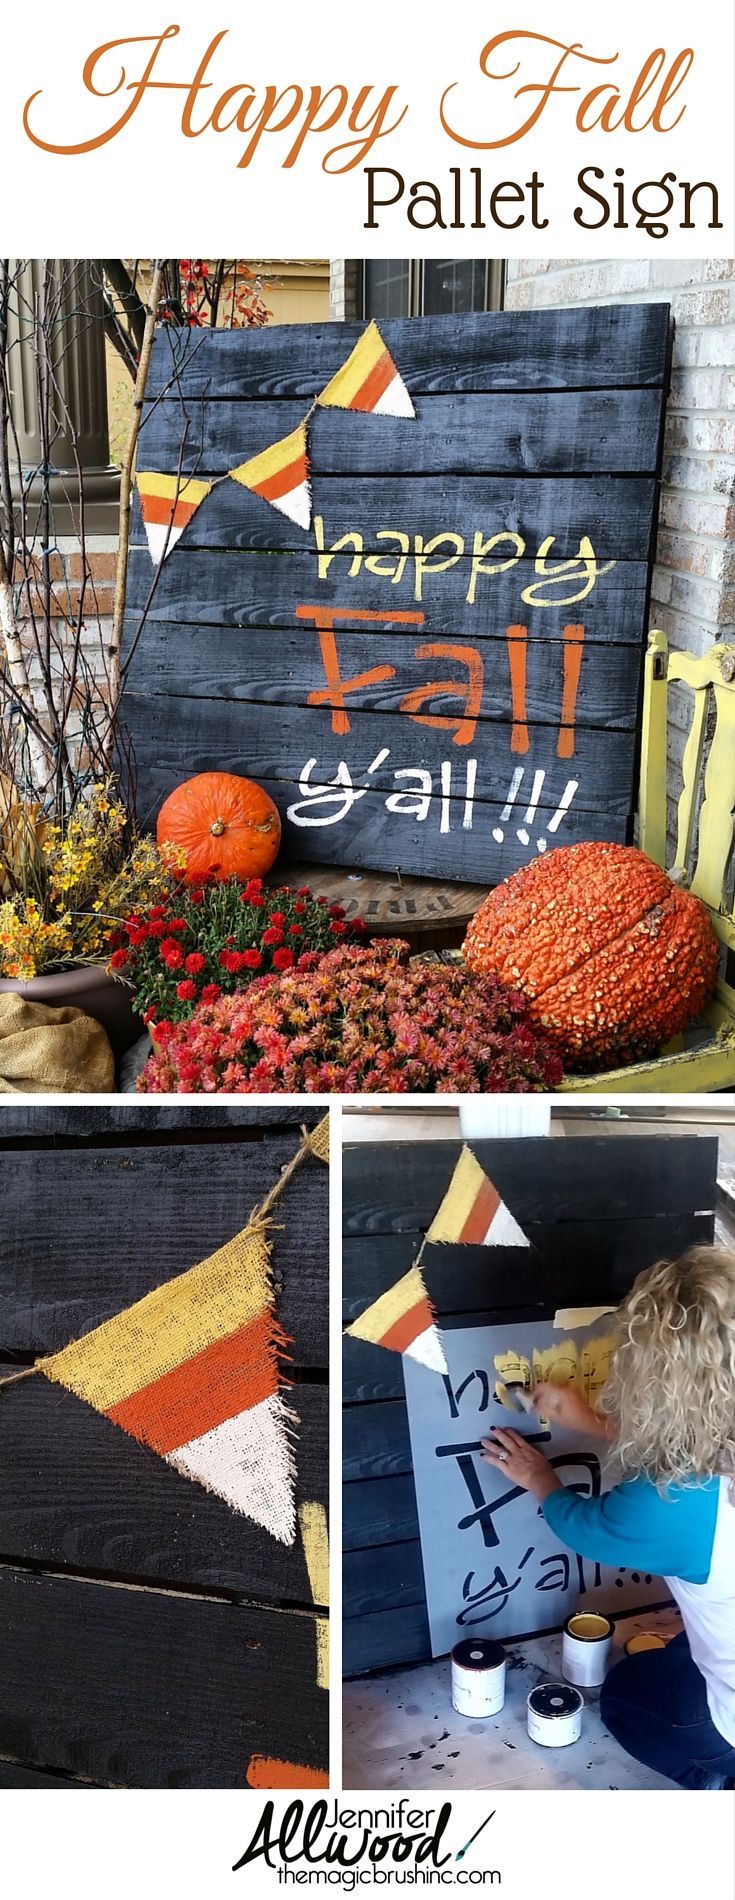 Happy Fall Y’all painted pallet for your front porch! This is an adorable idea for